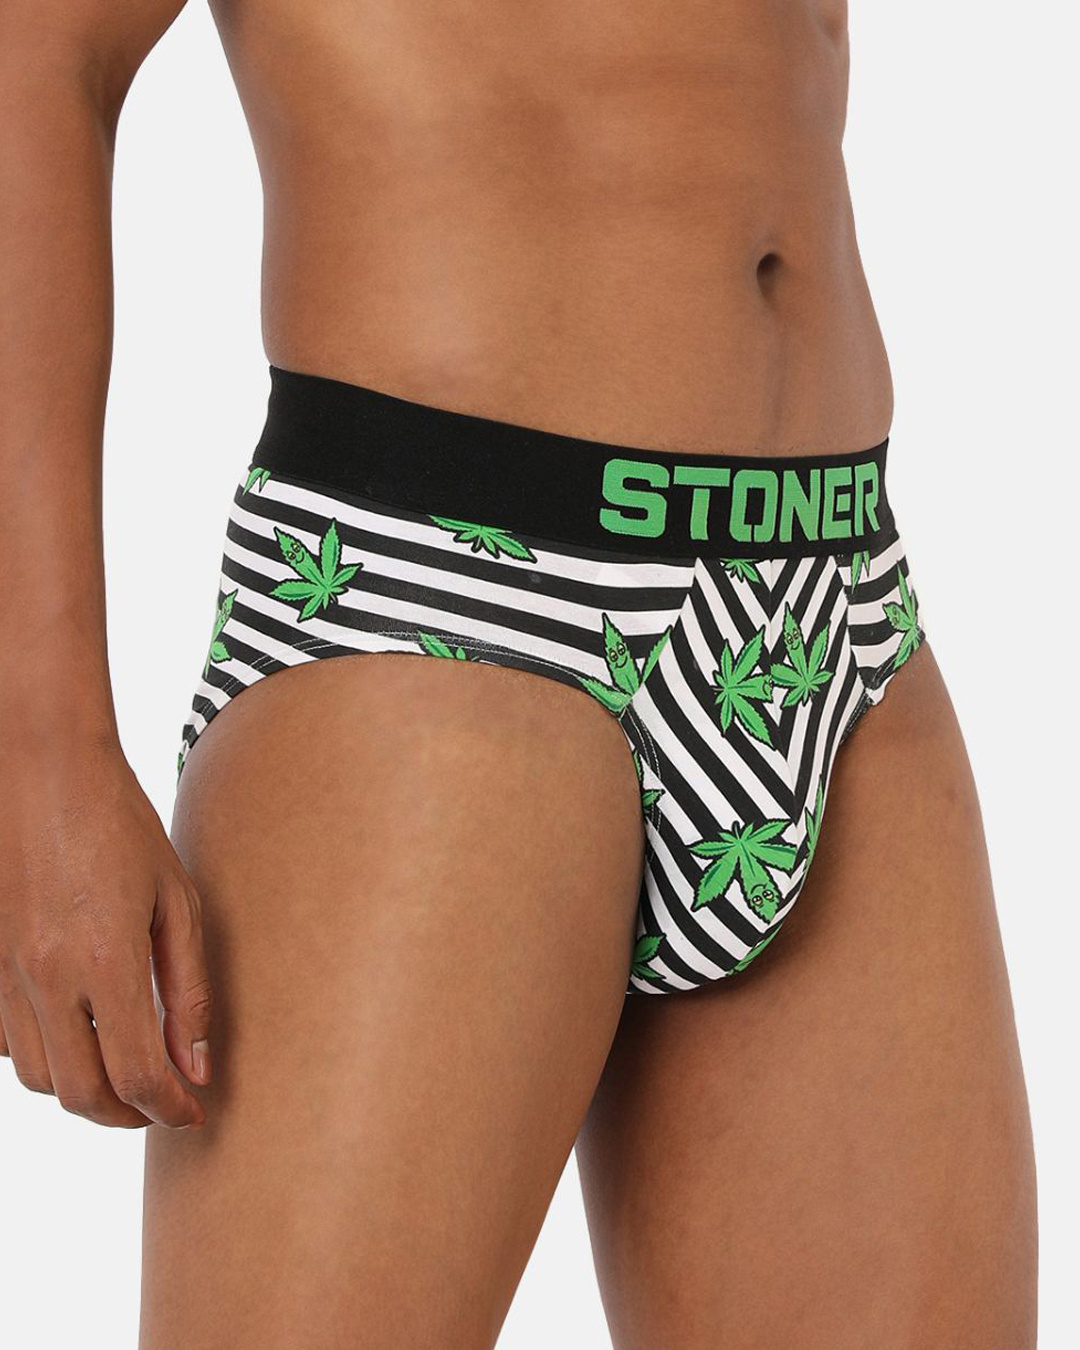 Shop Men's Black & White All Over Leaves Printed Striped Cotton Briefs-Back